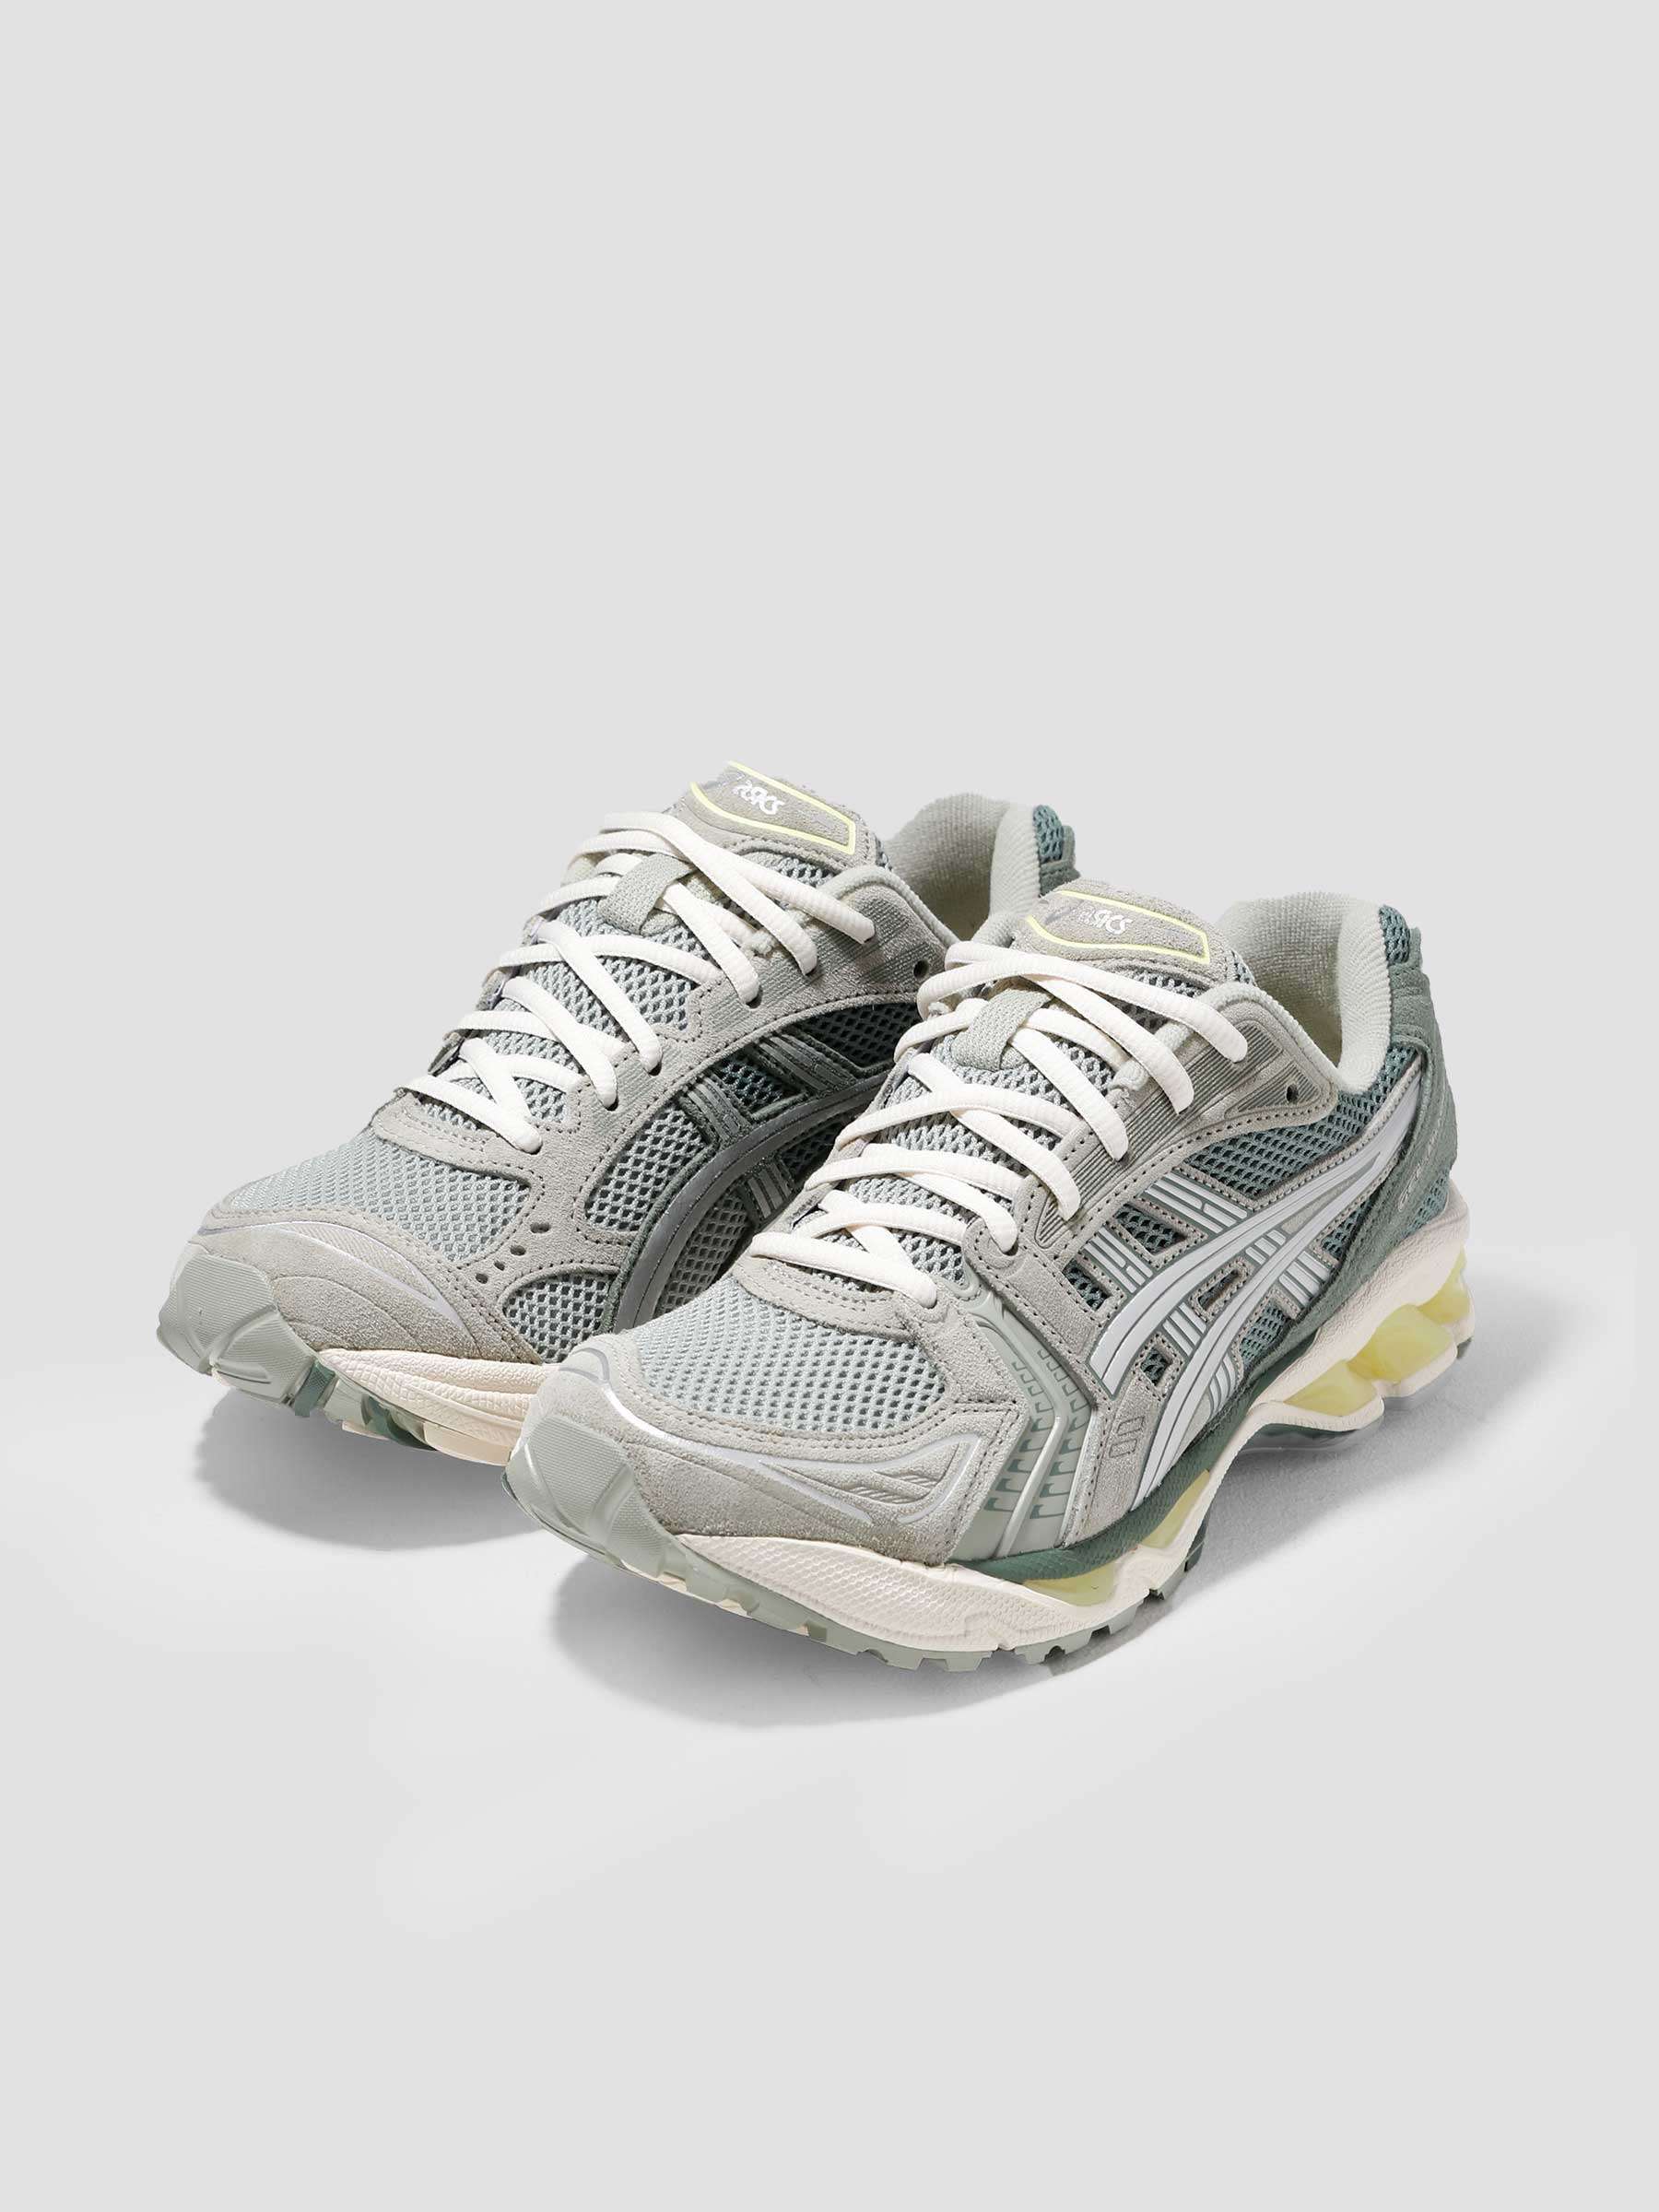 Gel-Kayano 14 Olive Grey Pure Silver 1201A161-301